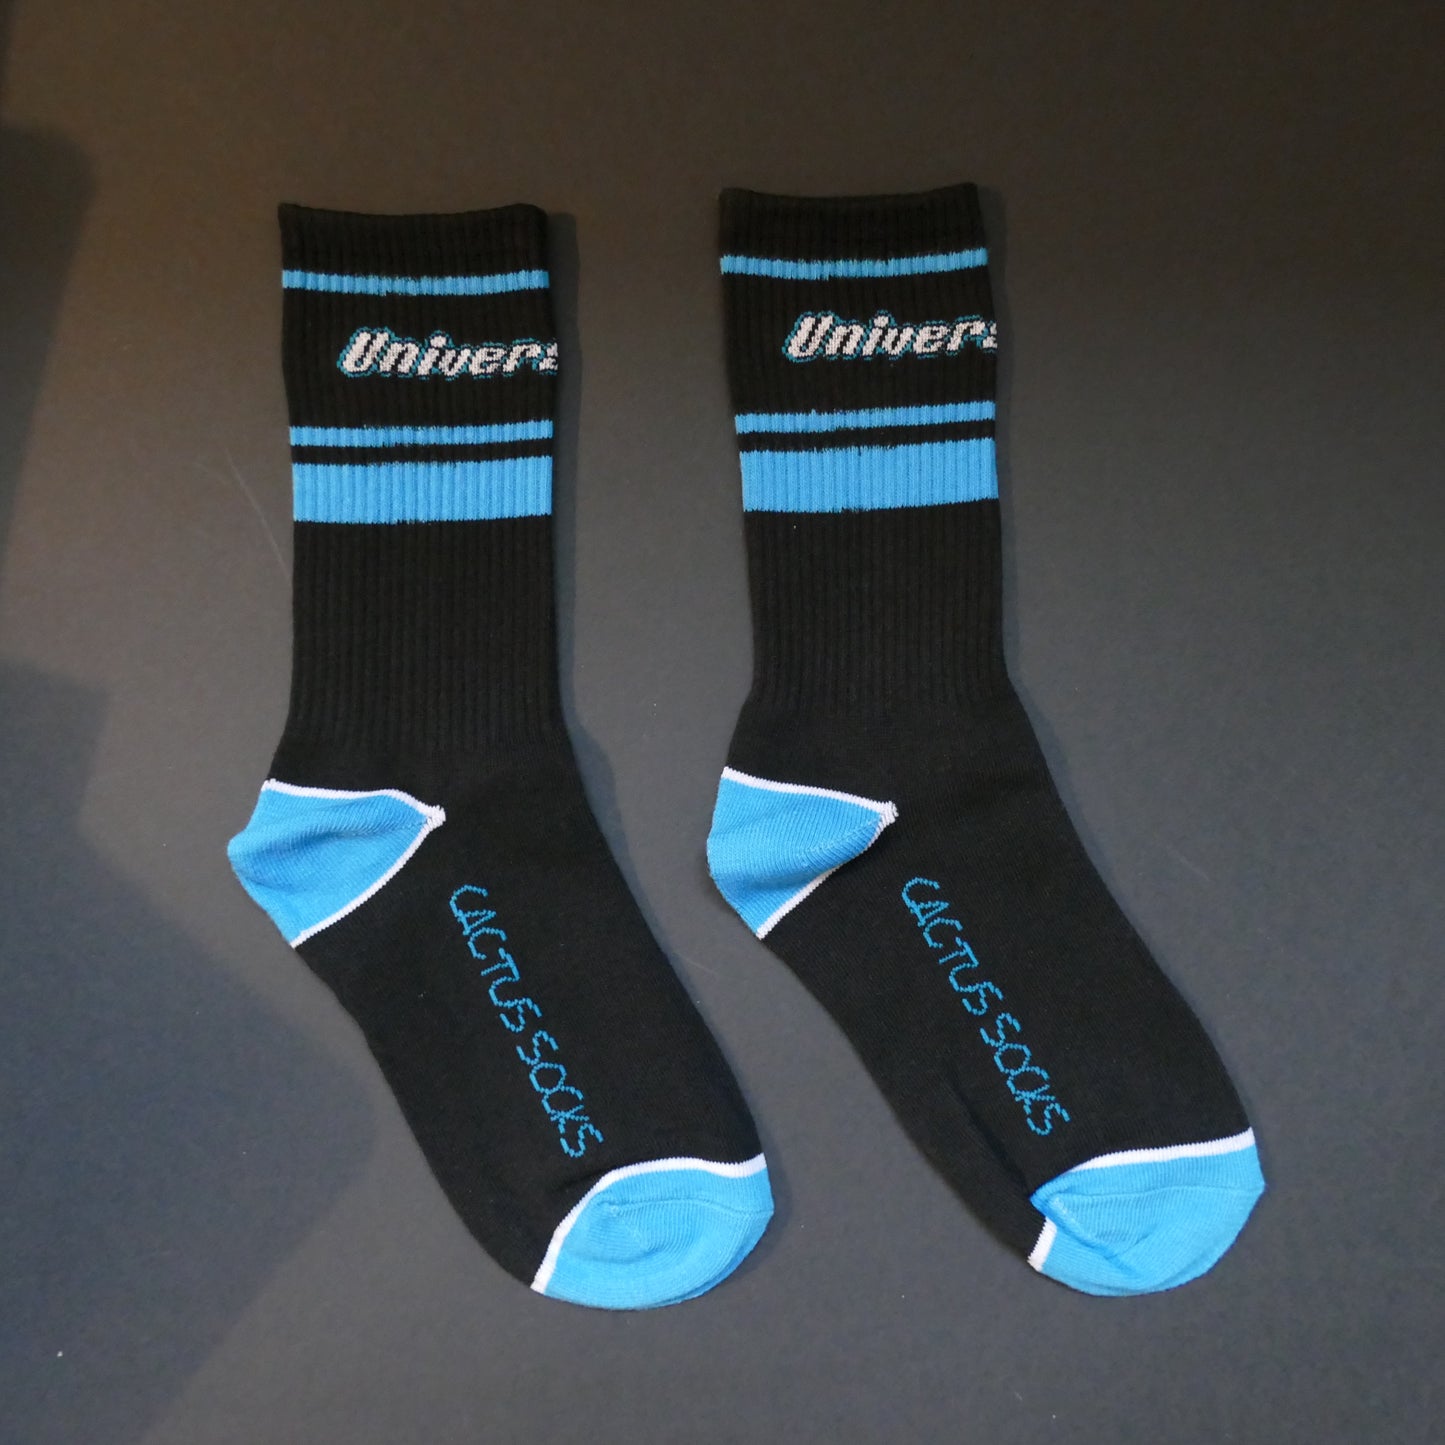 University Blue socks (3 colorway available)